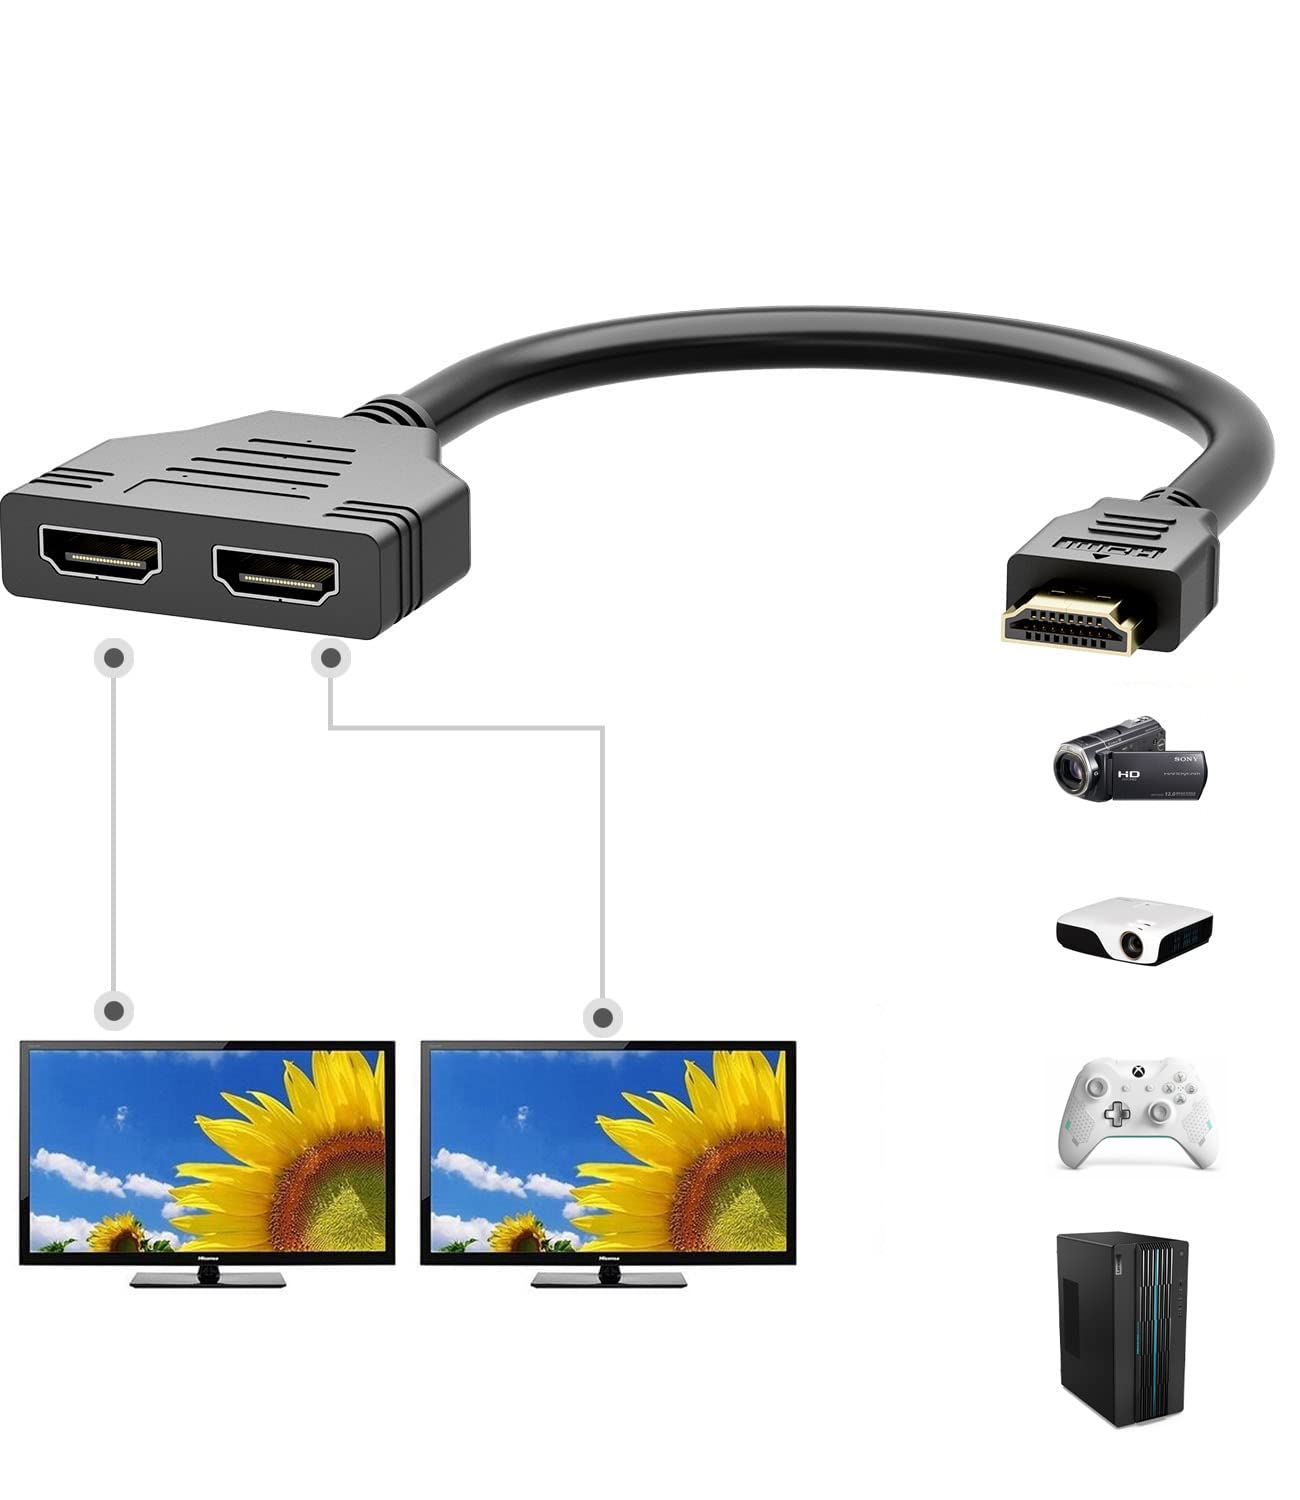 PANPEO HDMI Splitter for Dual Monitors, HDMI Cable [...]